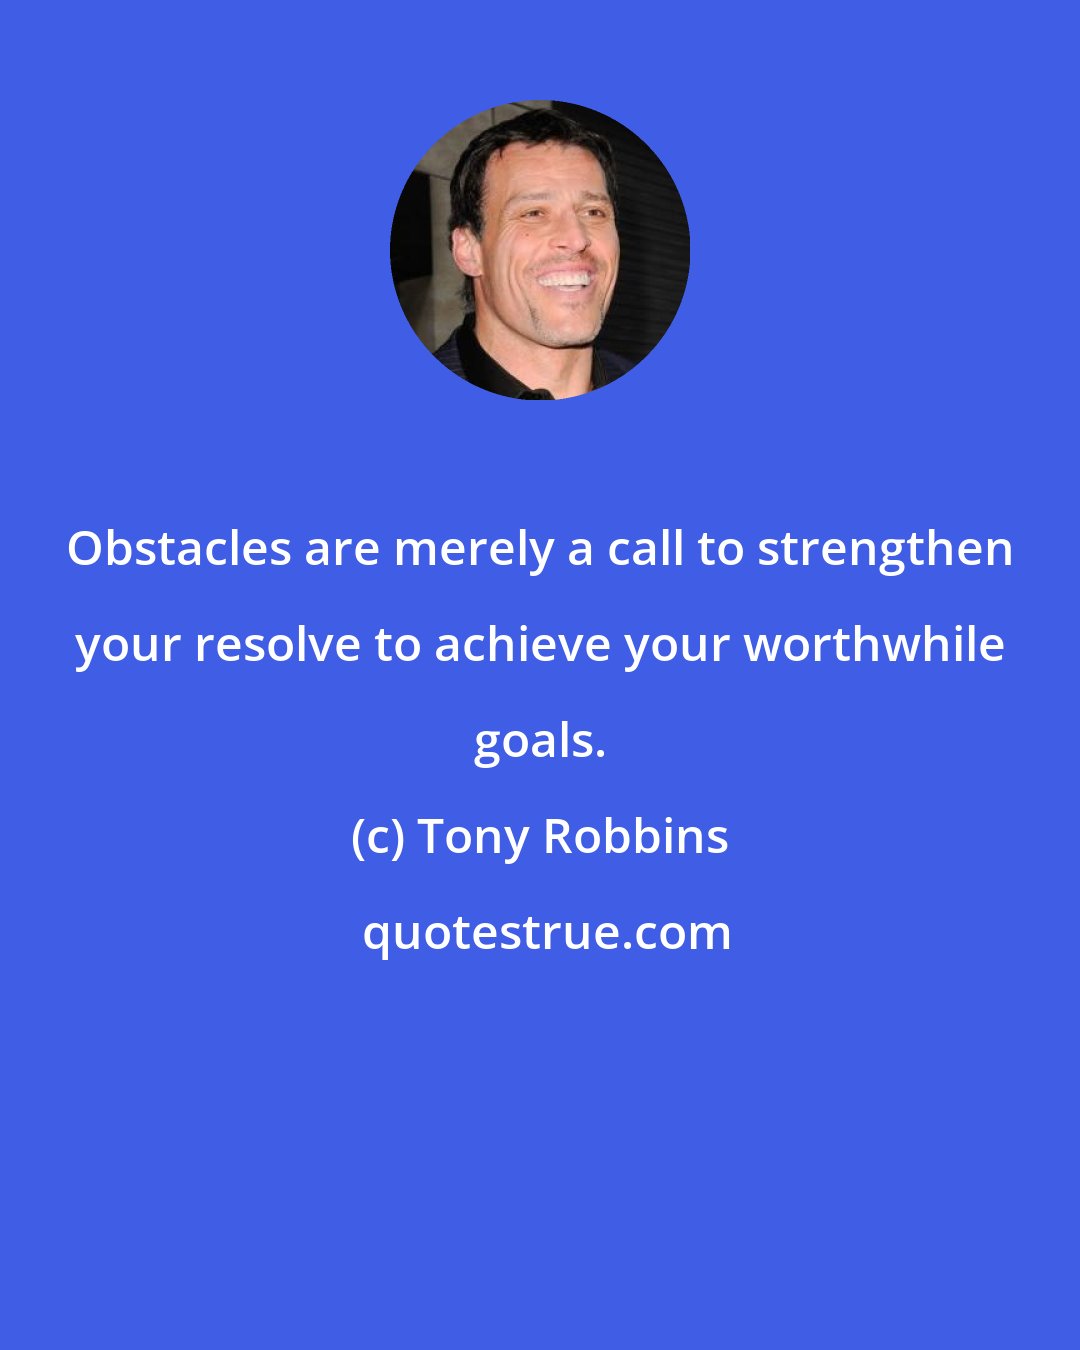 Tony Robbins: Obstacles are merely a call to strengthen your resolve to achieve your worthwhile goals.